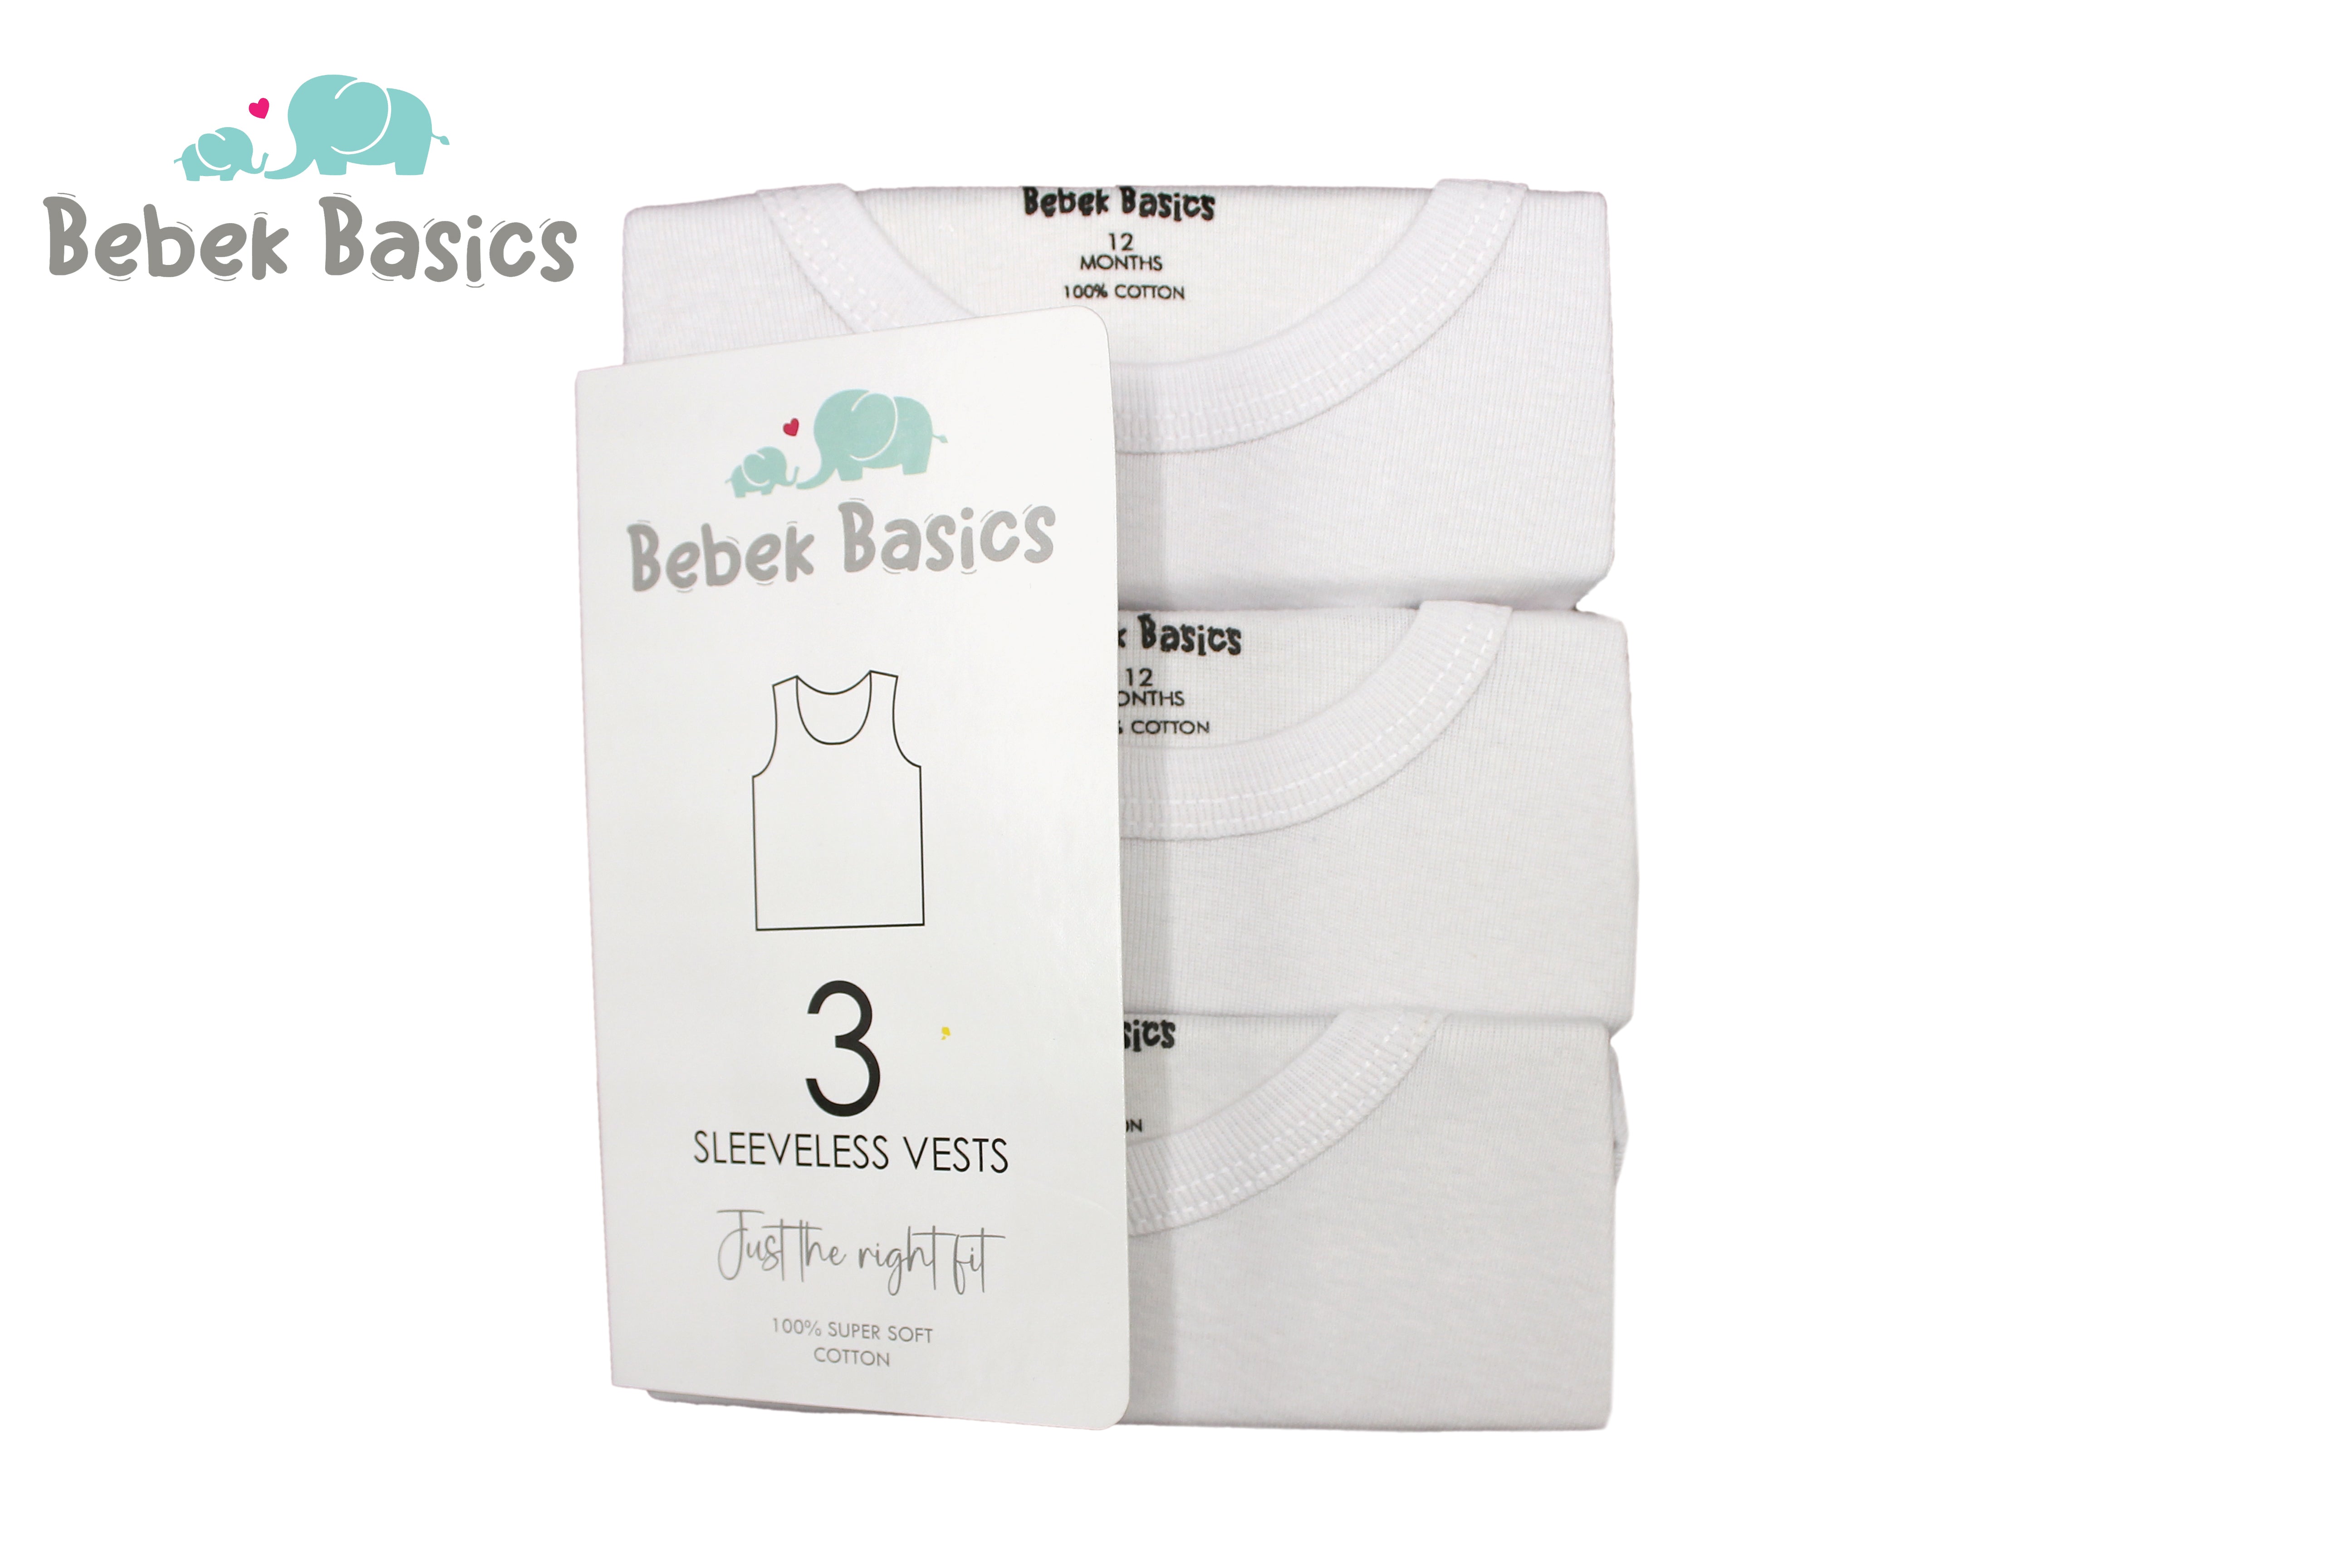 SLEEVELESS VESTS PACK OF 3 - 29734